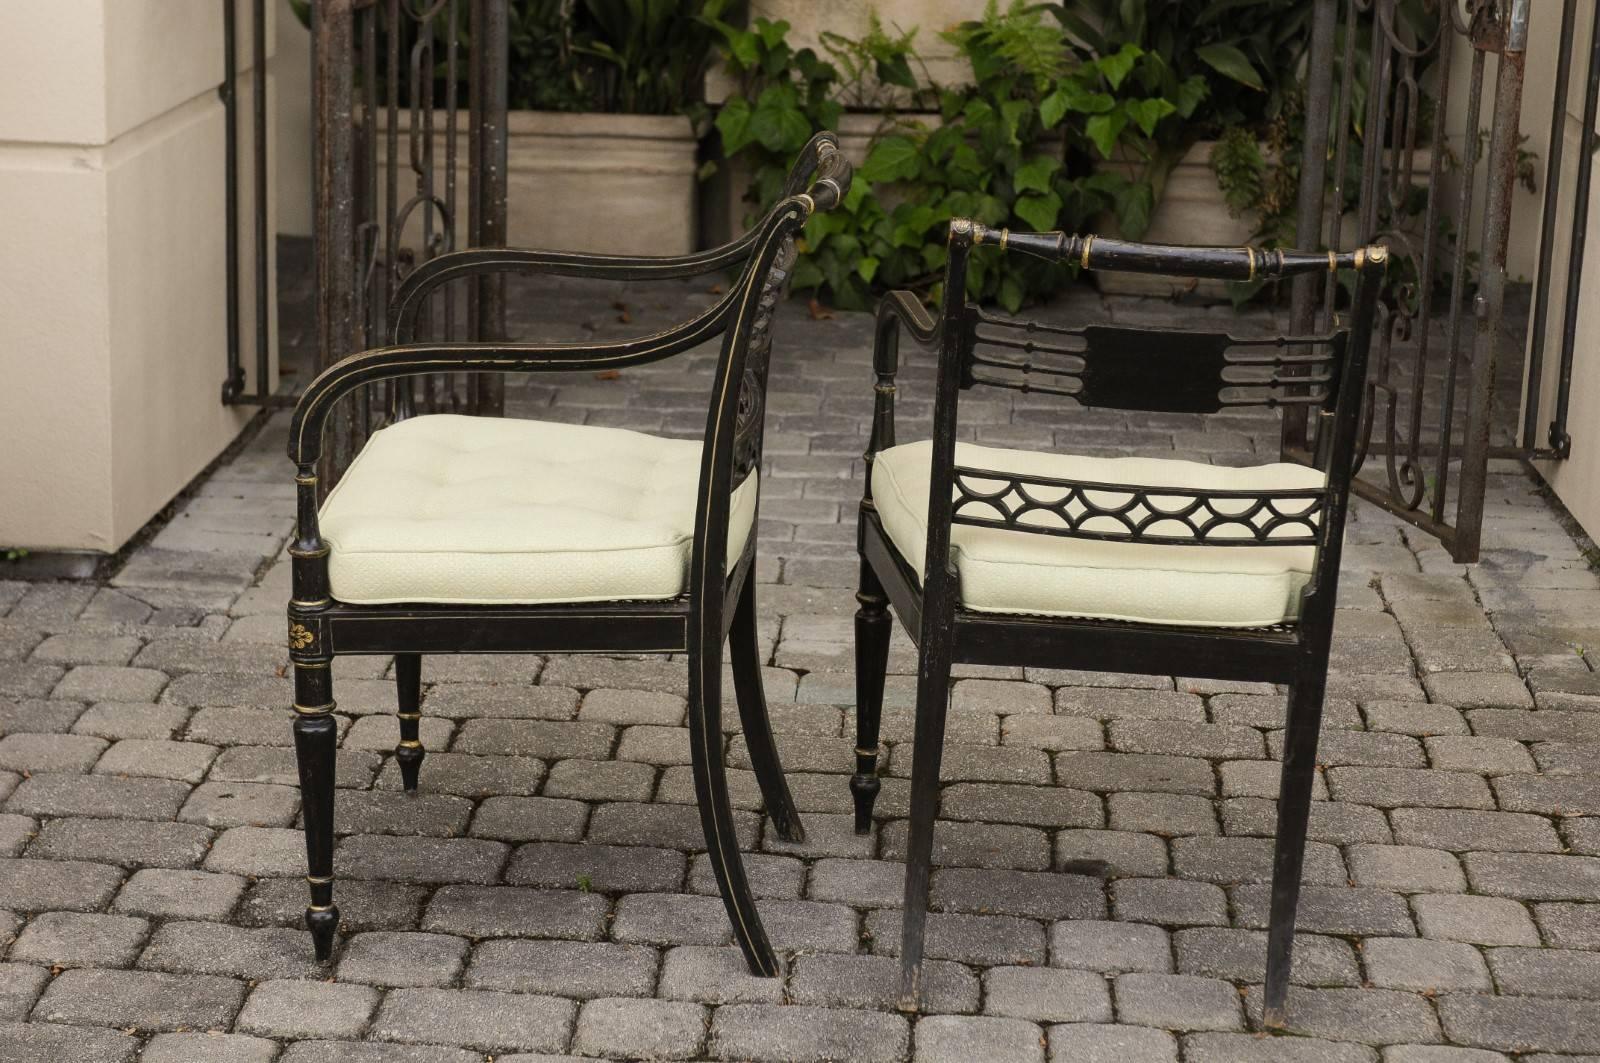 A pair of English Regency style ebonized wood open armchairs from the mid-19th century, with gilded accents, pierced backs and new custom-made cushions. Each of this pair of English armchairs features an elegant ebonized structure, delicately